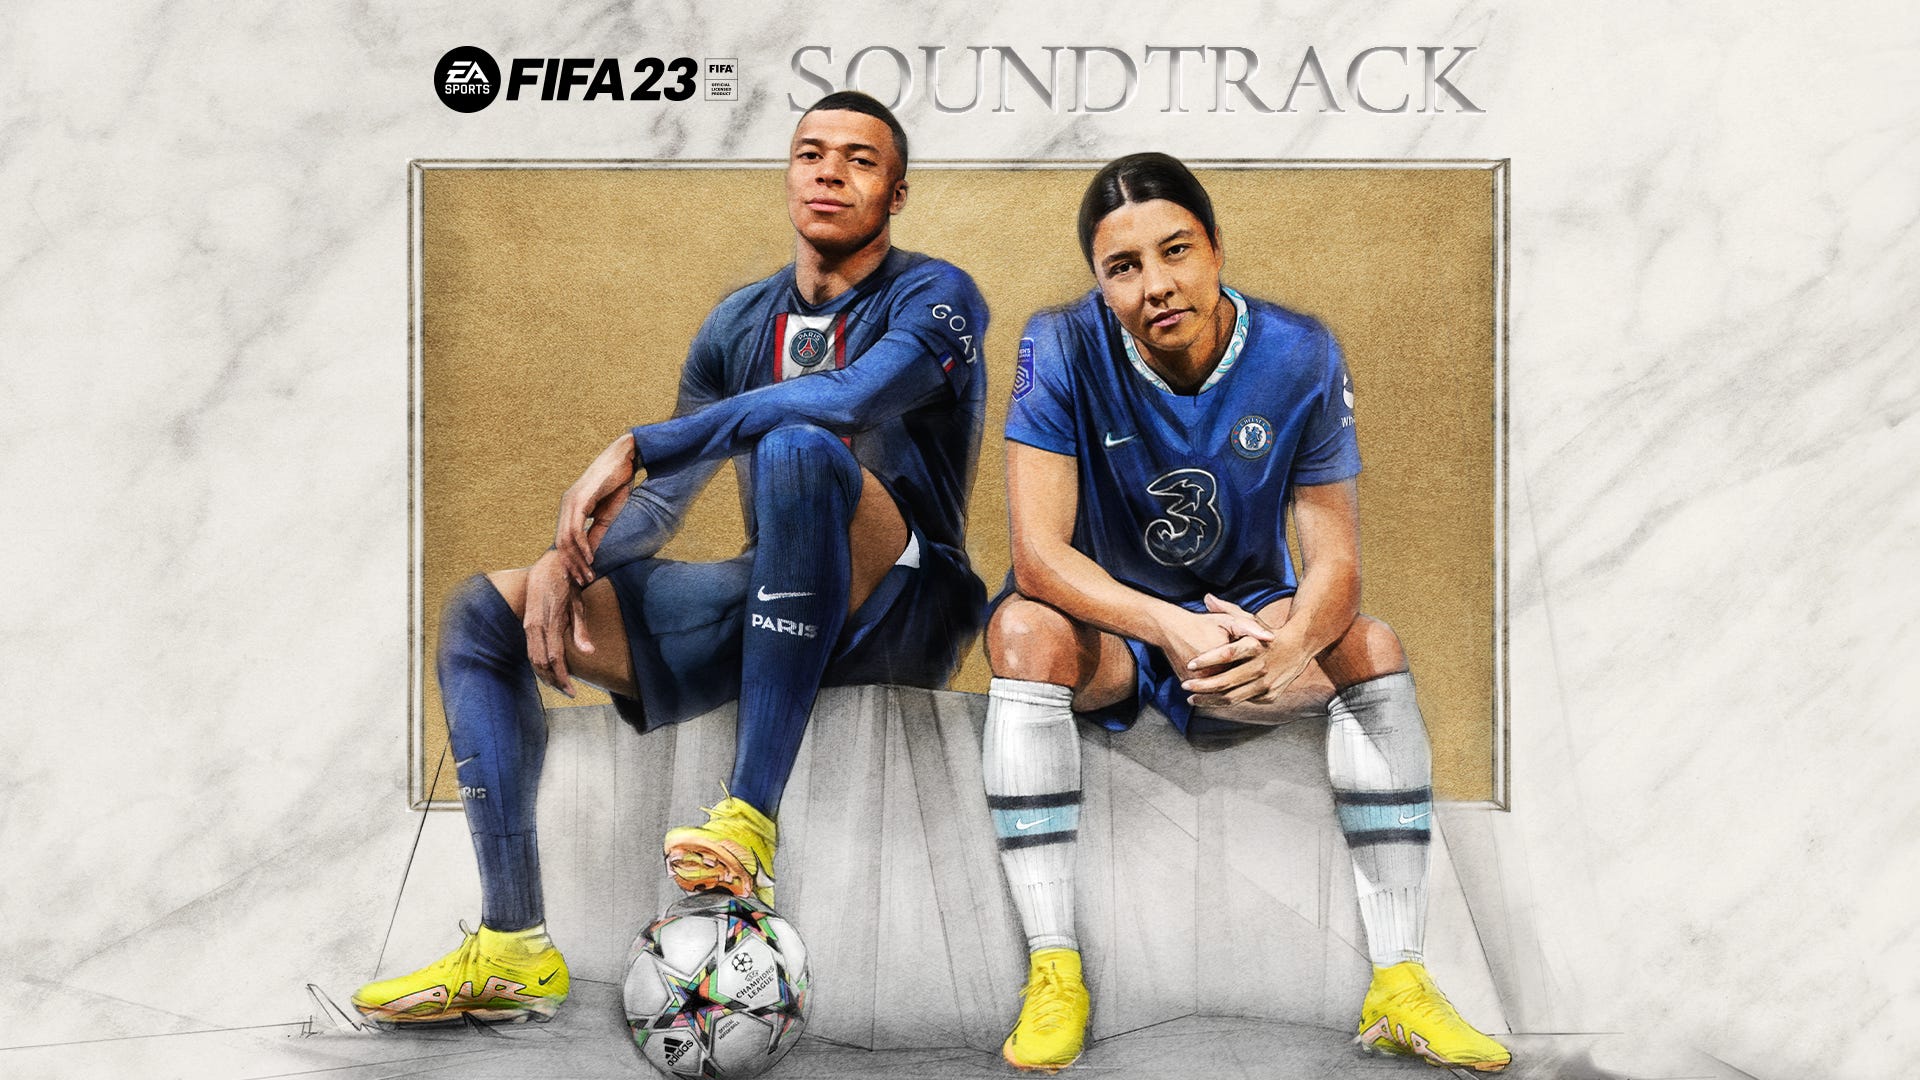 FIFA 23 soundtrack: Artists, songs & music on new game revealed | Goal.com